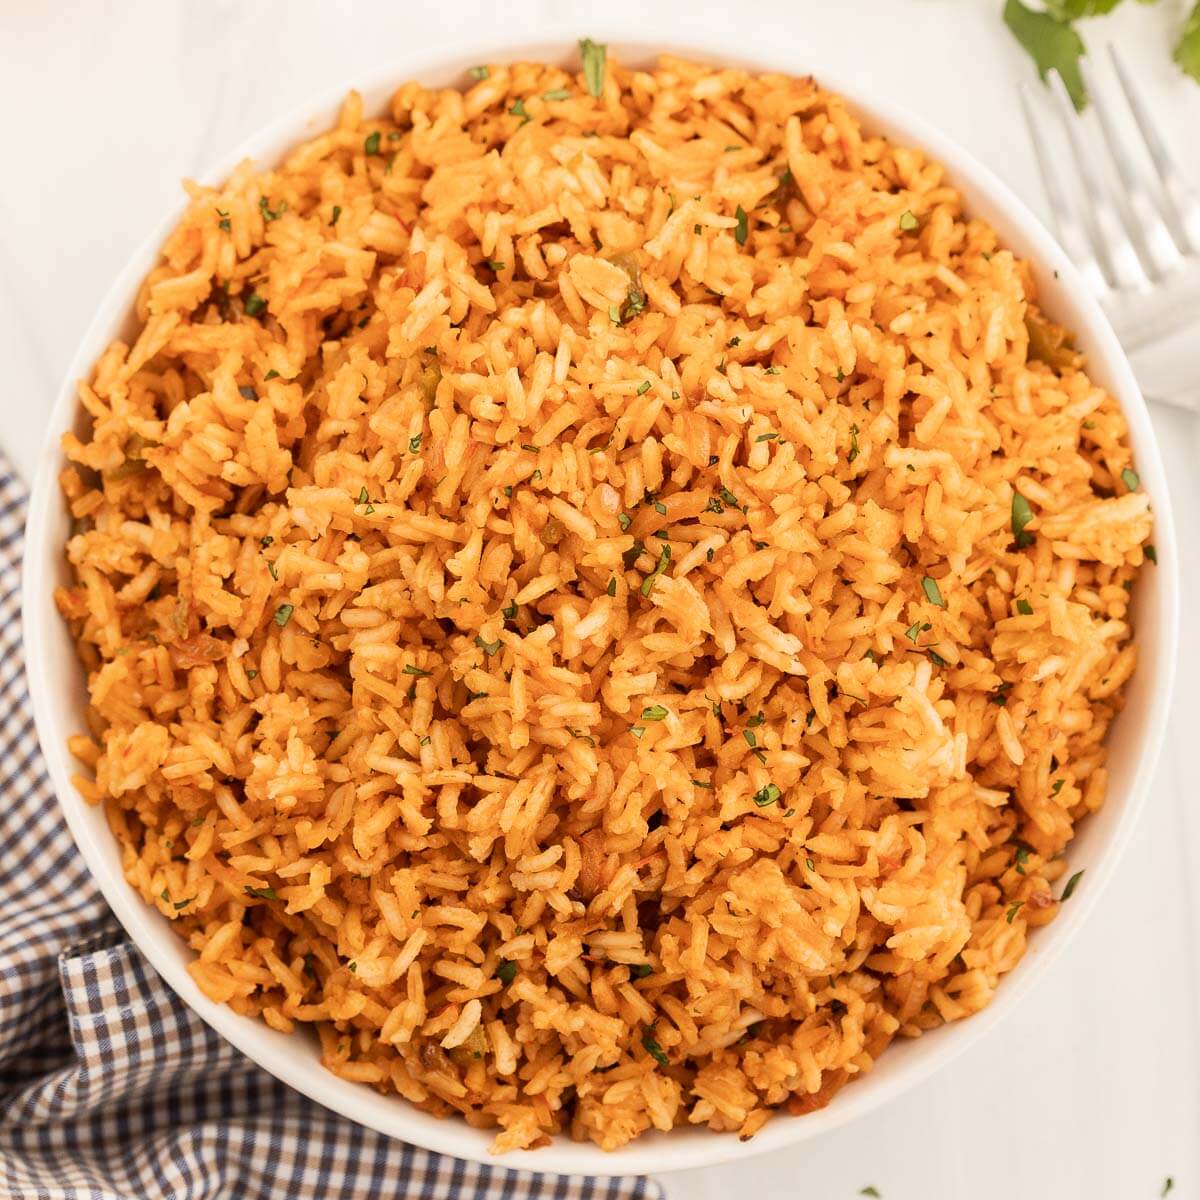 Close up image of Spanish Rice in a white bowl